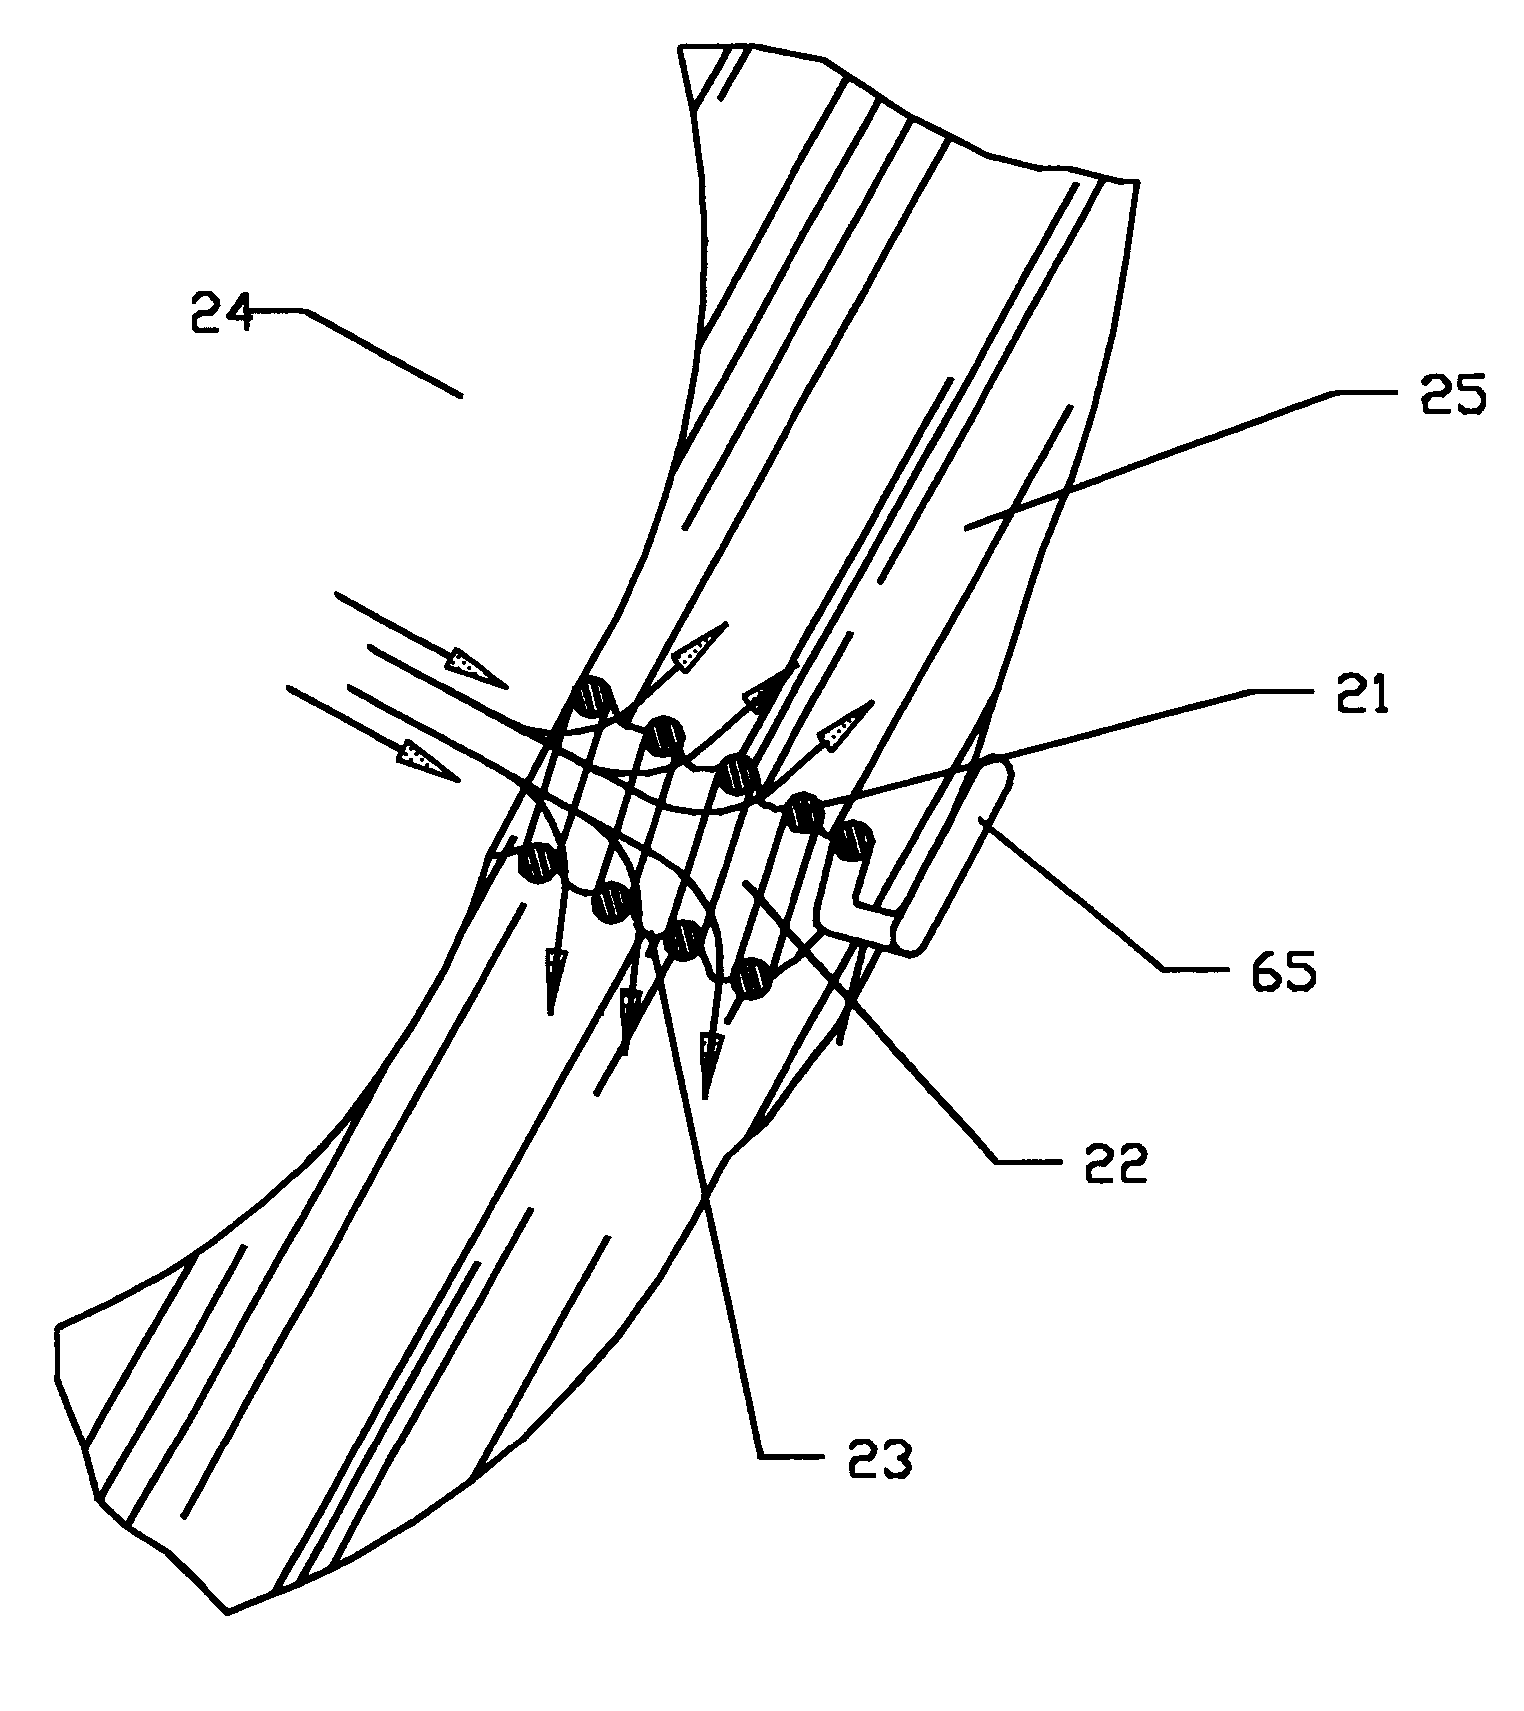 Implant device for trans myocardial revascularization